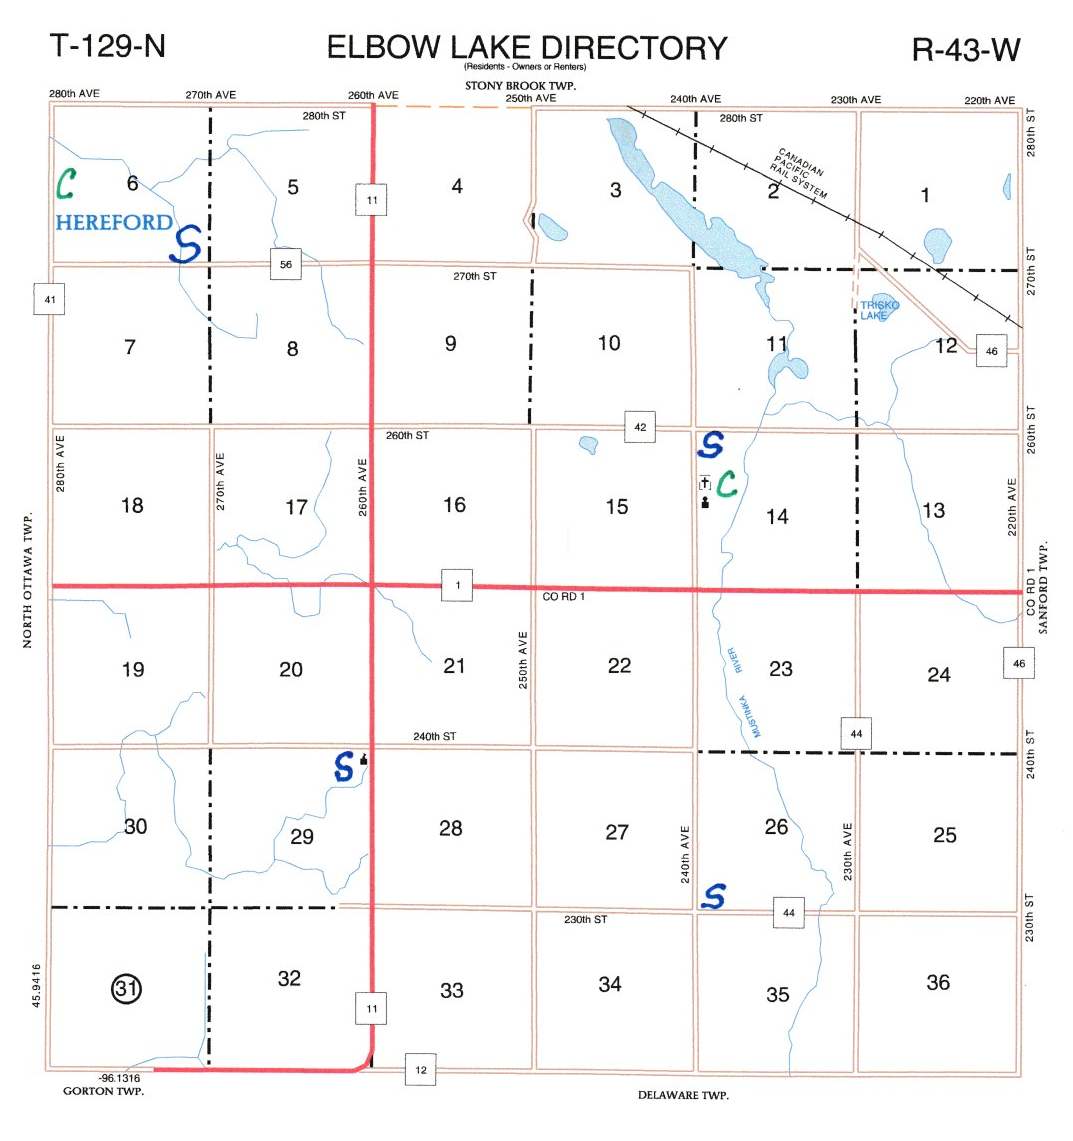 Elbow Lake Township early cemeteries and schools